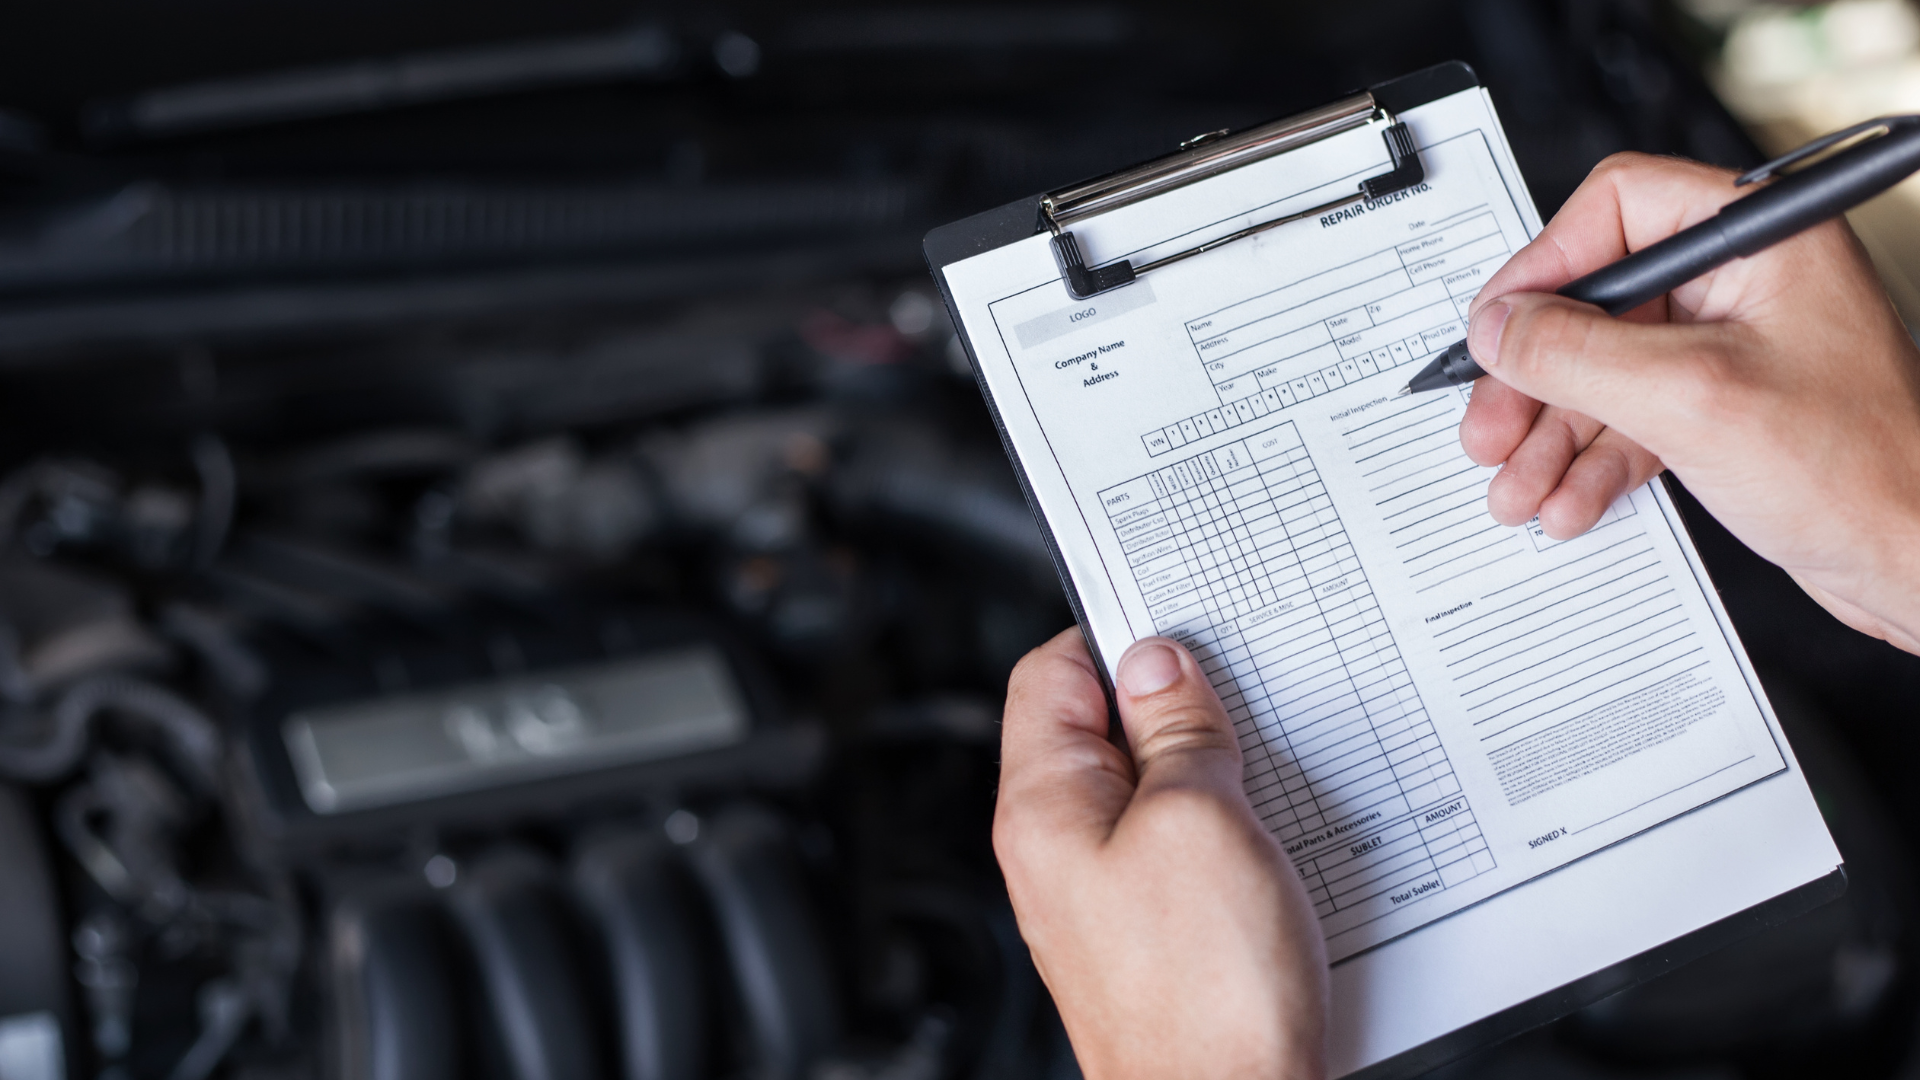 independent vehicle inspection checklist with a car int he background